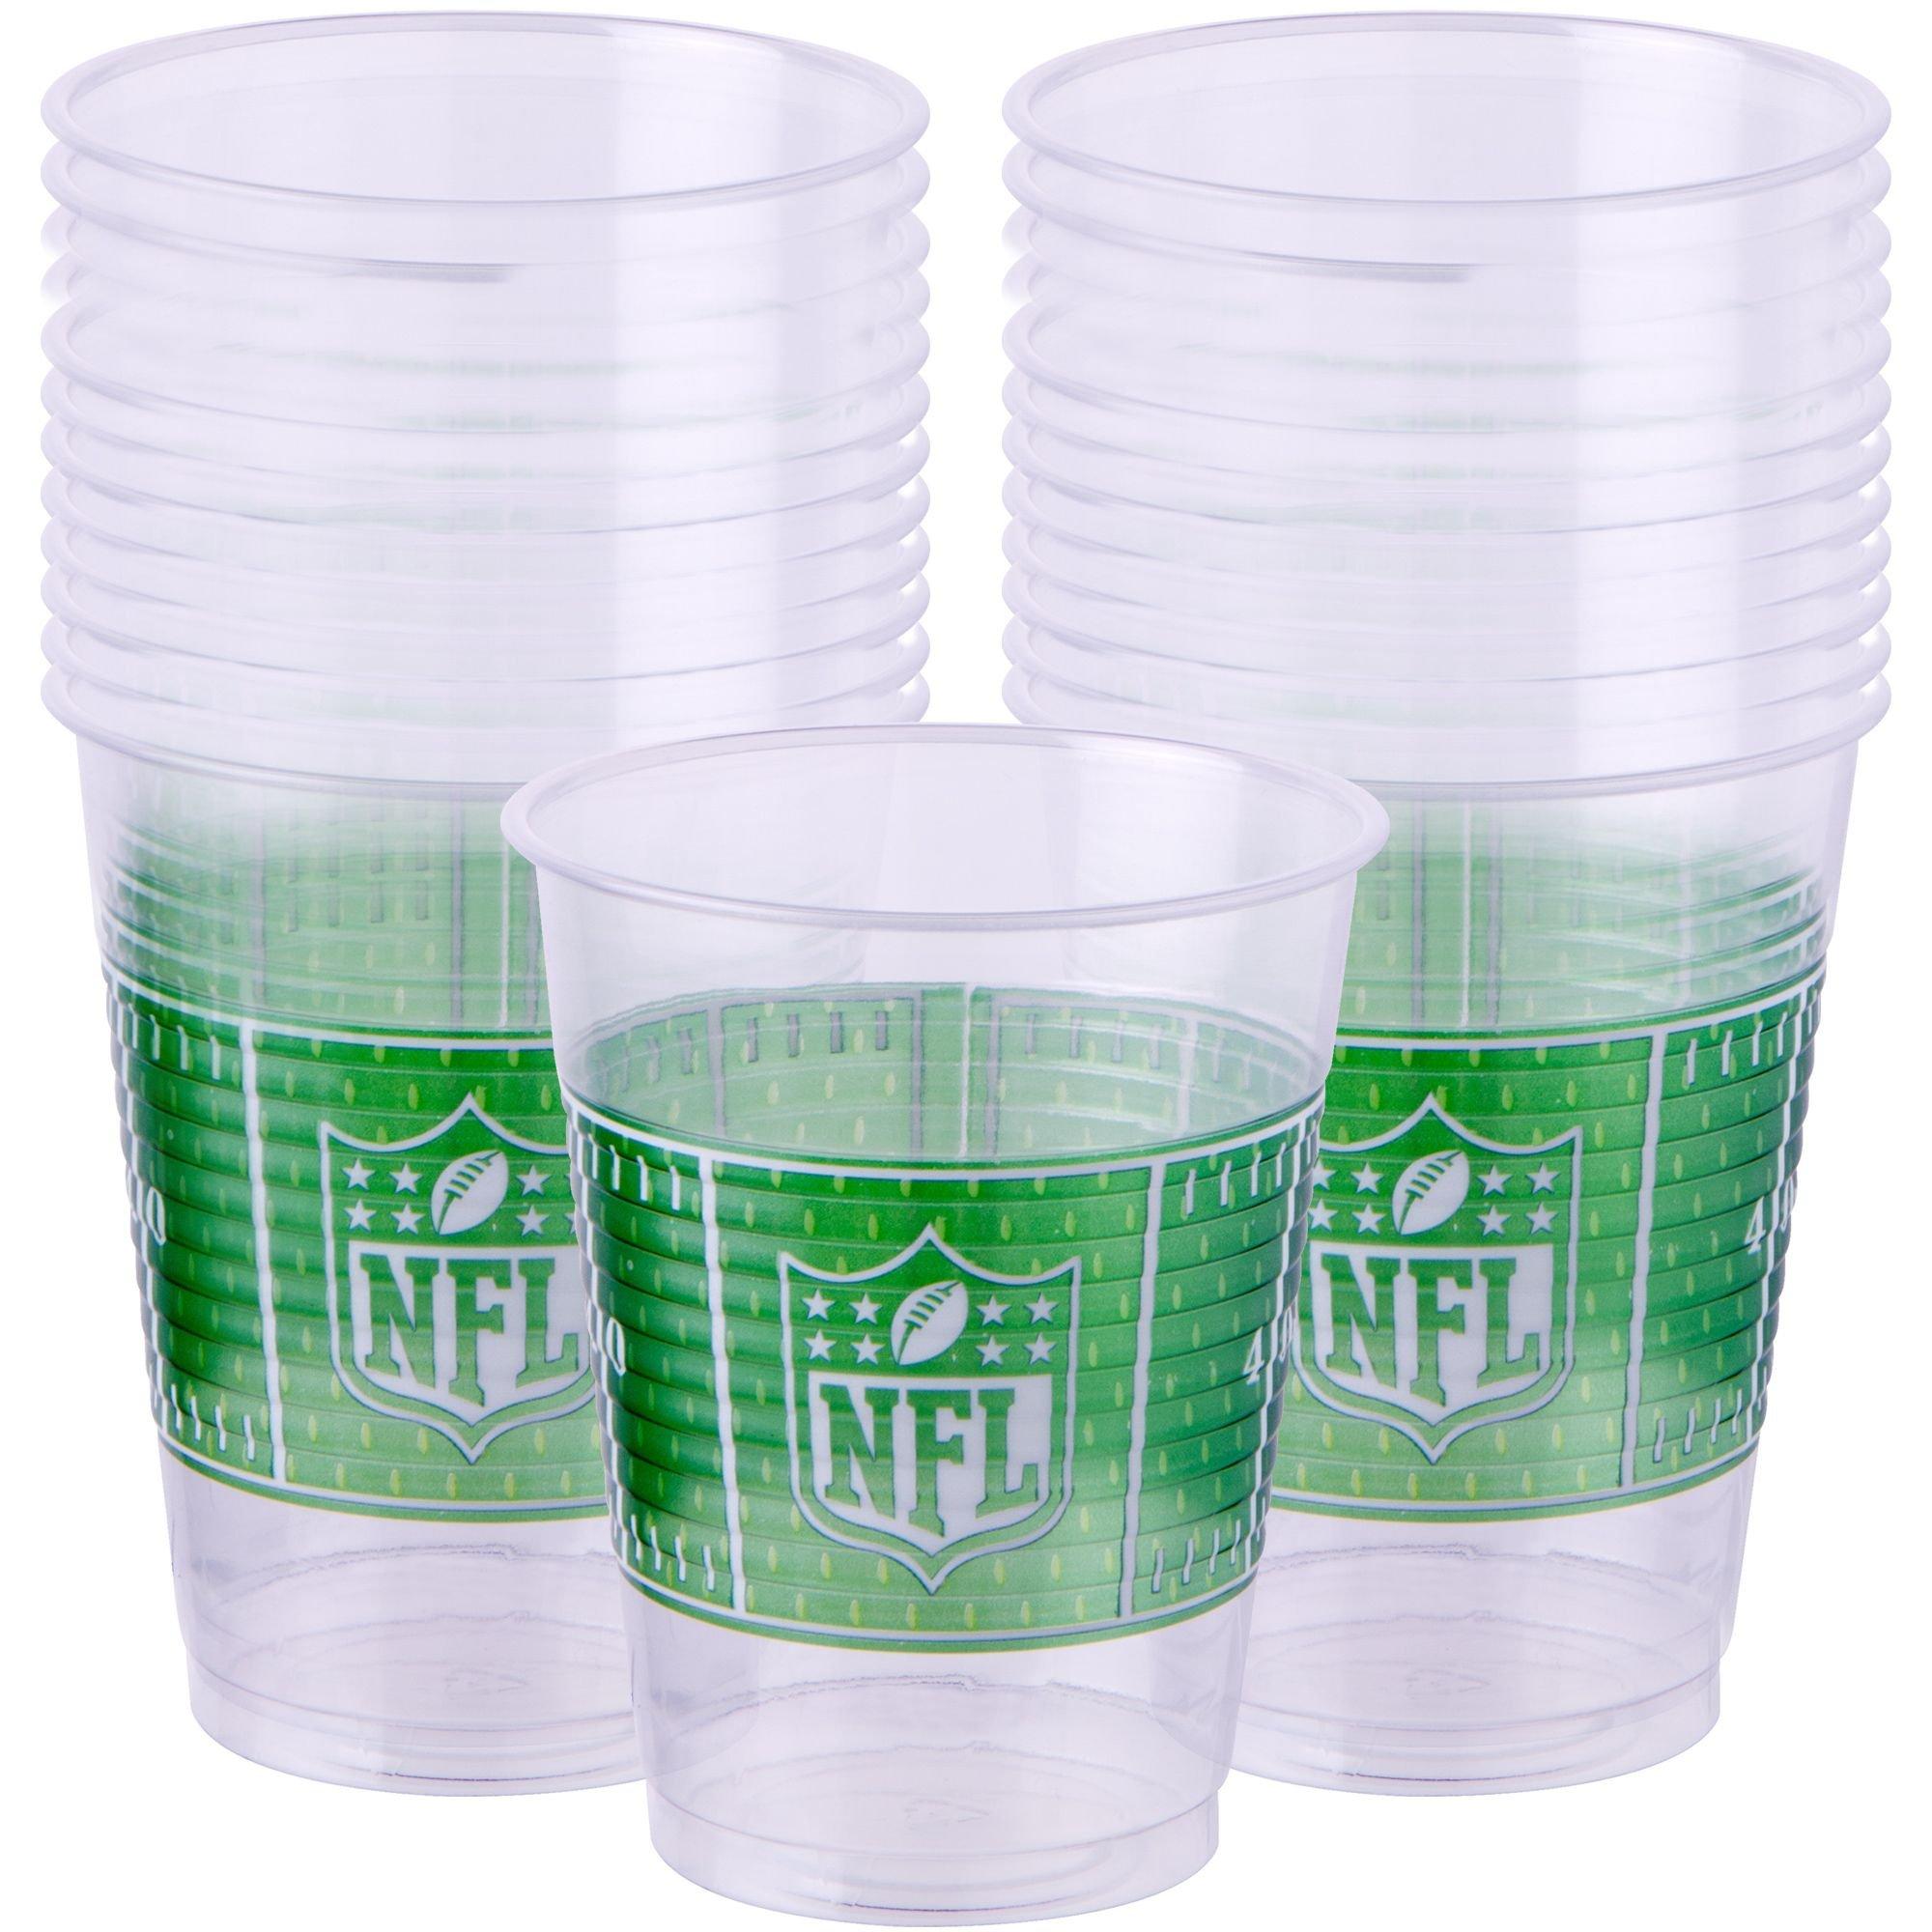 Amscan NFL (afc) Licenced 16oz Party Cups - 25 Pack - Choose Team Black/Yellow